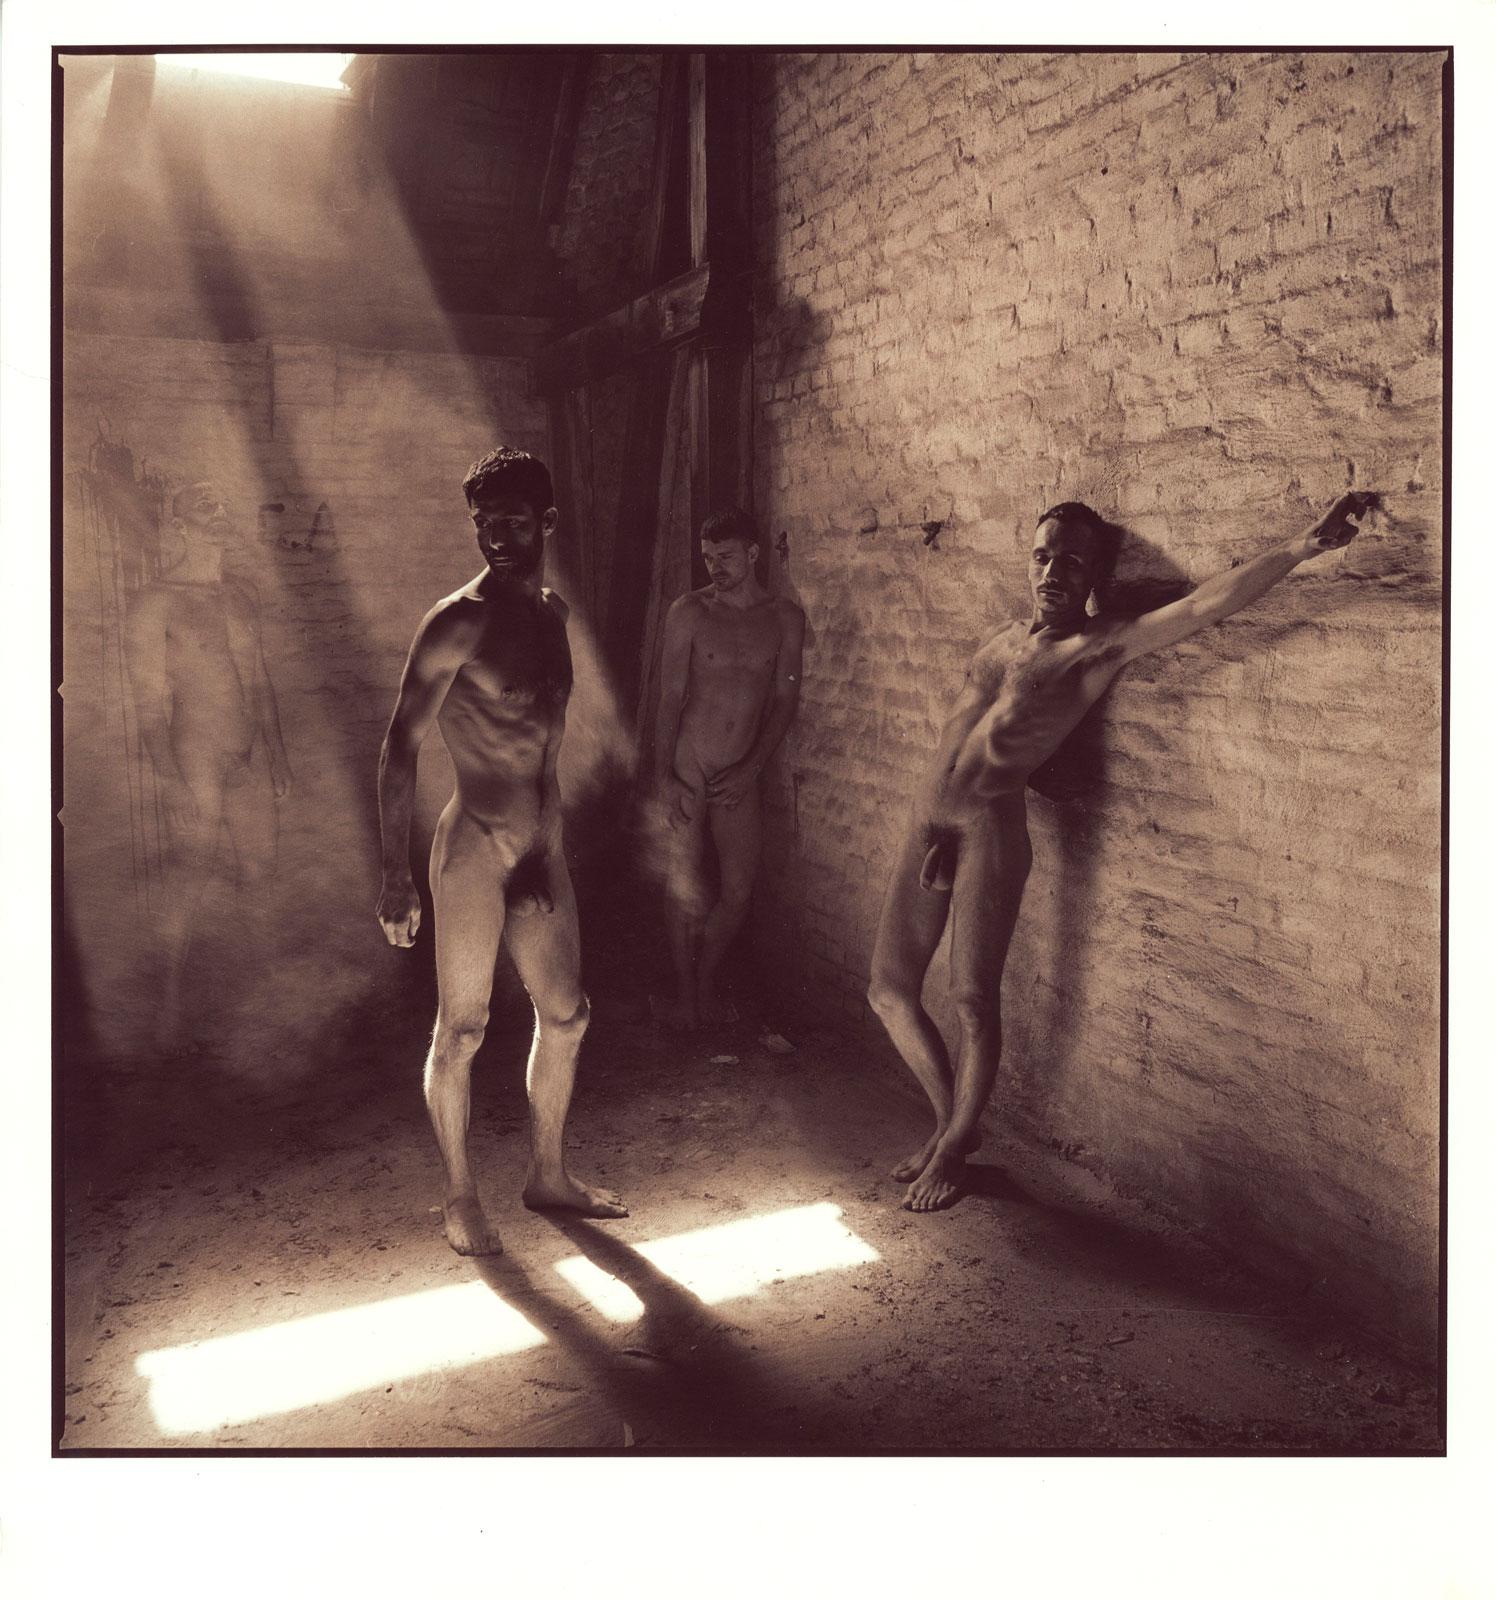 Brandenburg 2010 (Real Nude Soldiers Haunted by Ghostly Spirits of Past) - Photograph by Daniel Kane